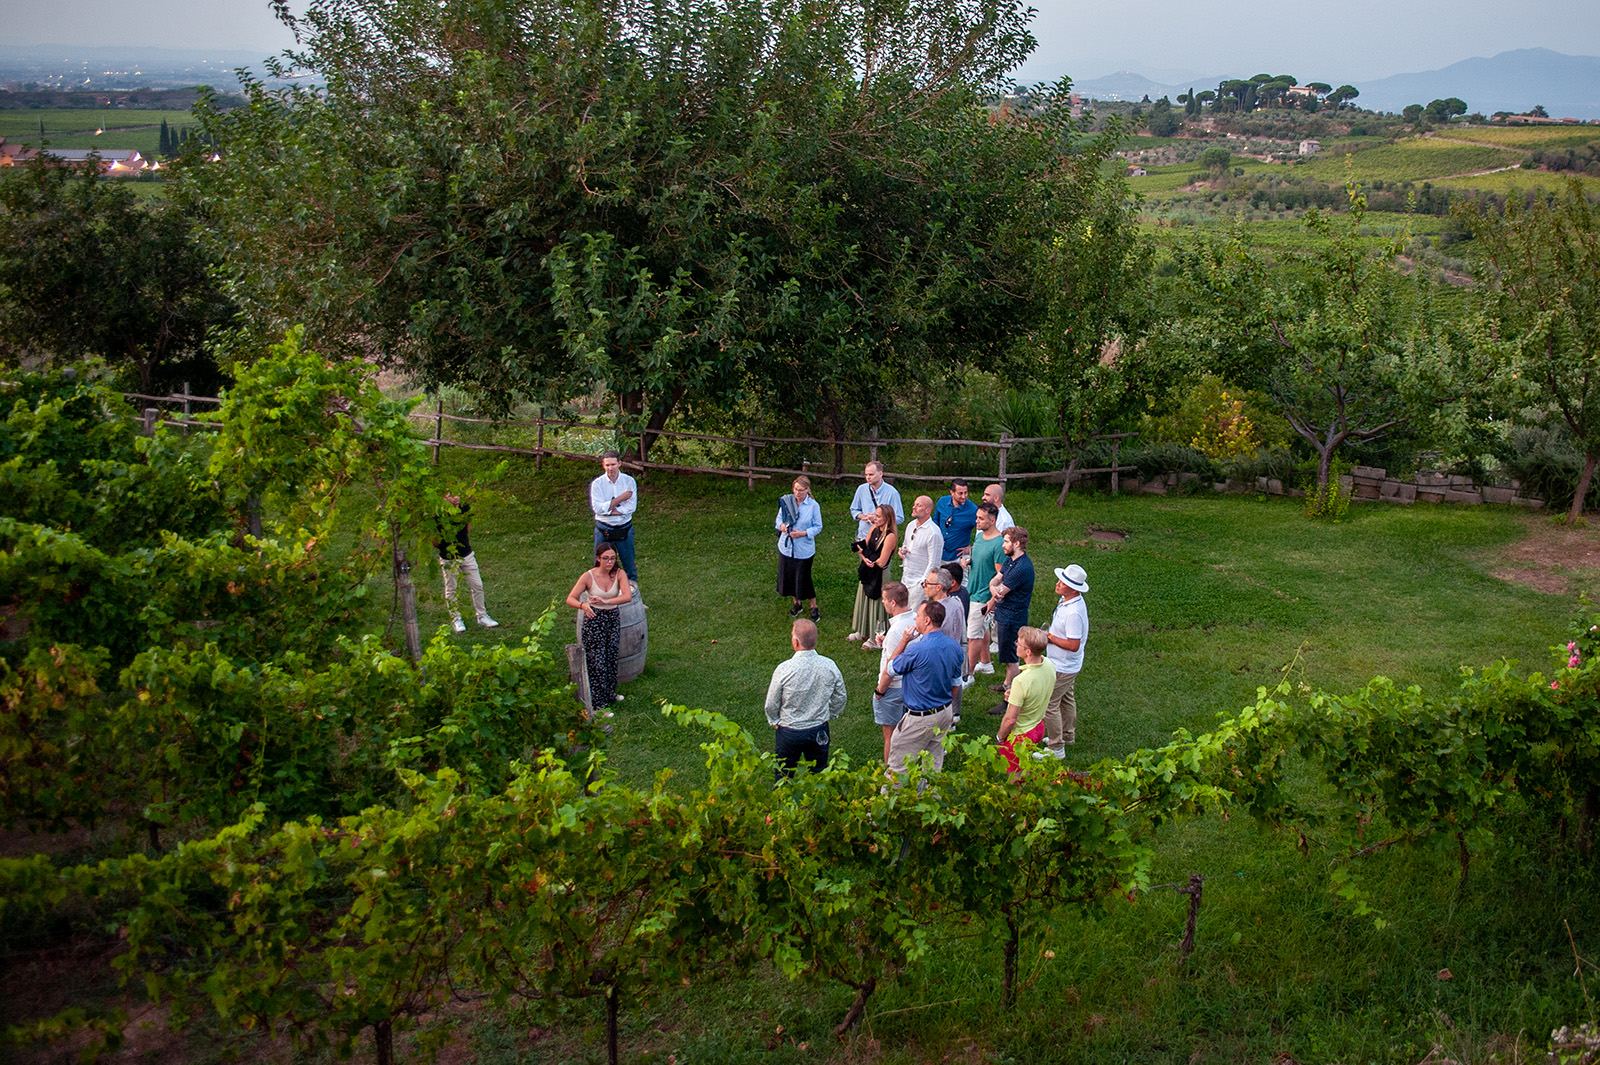 Talking about the work in the vineyards